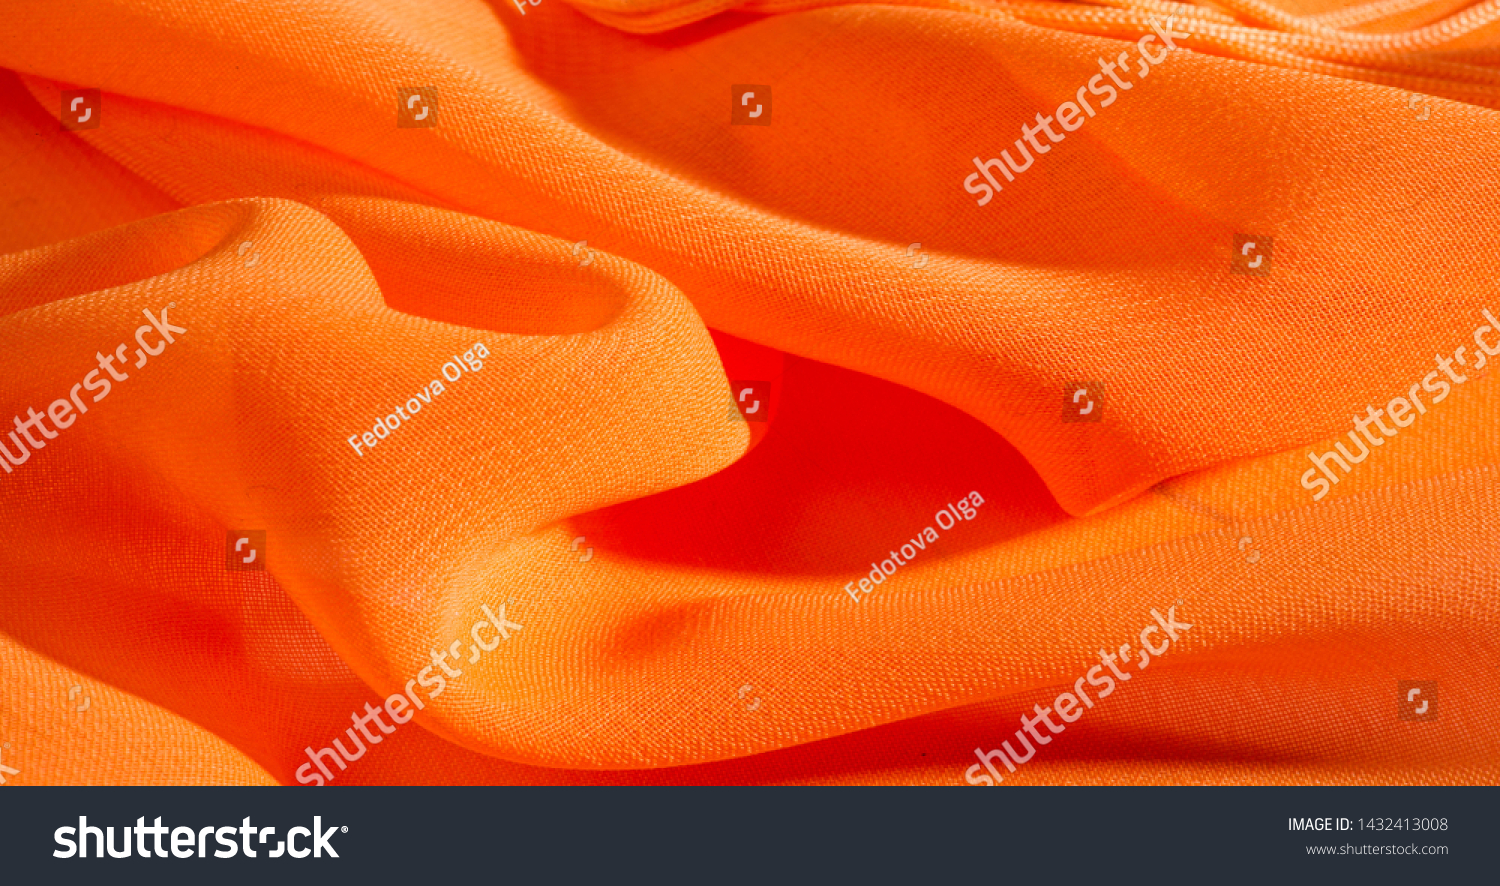 background, pattern, texture, Orange silk fabric has a brilliant luster. It folds into soft folds when draping and is the most versatile fabric. Be creative with beautiful accents of your design. #1432413008